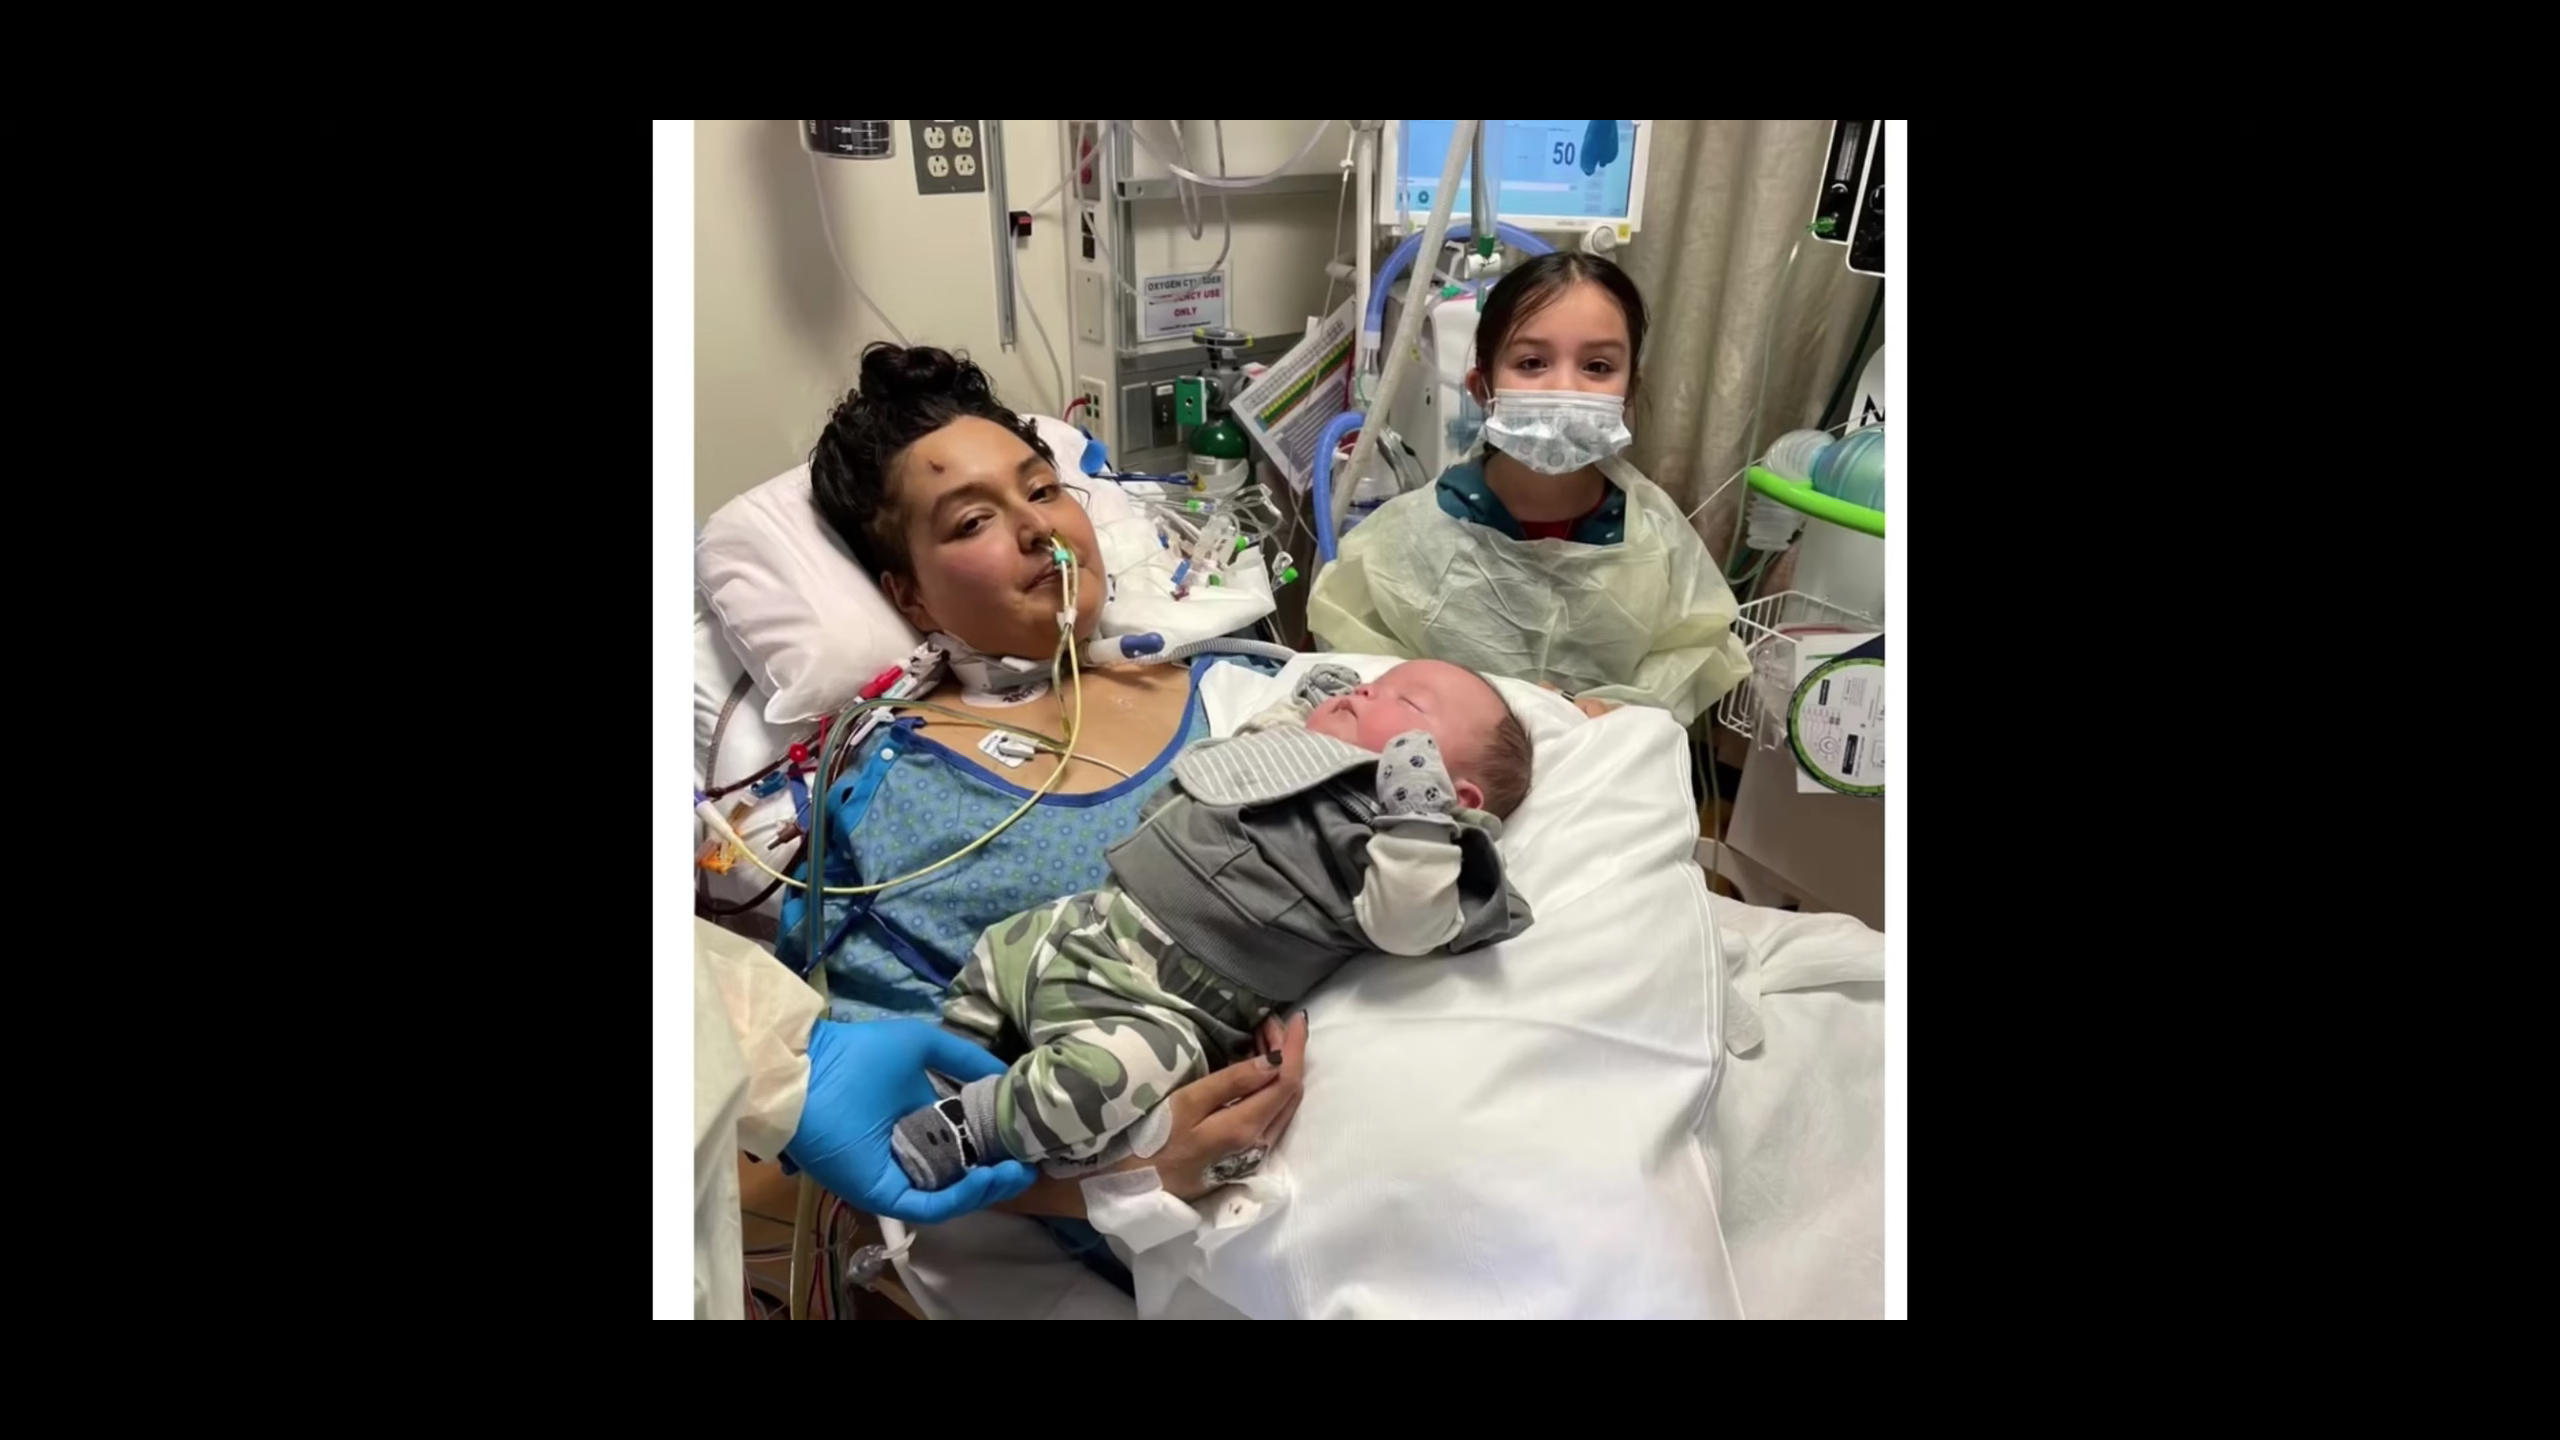 Mother holding newborn child while recovering from COVID-19